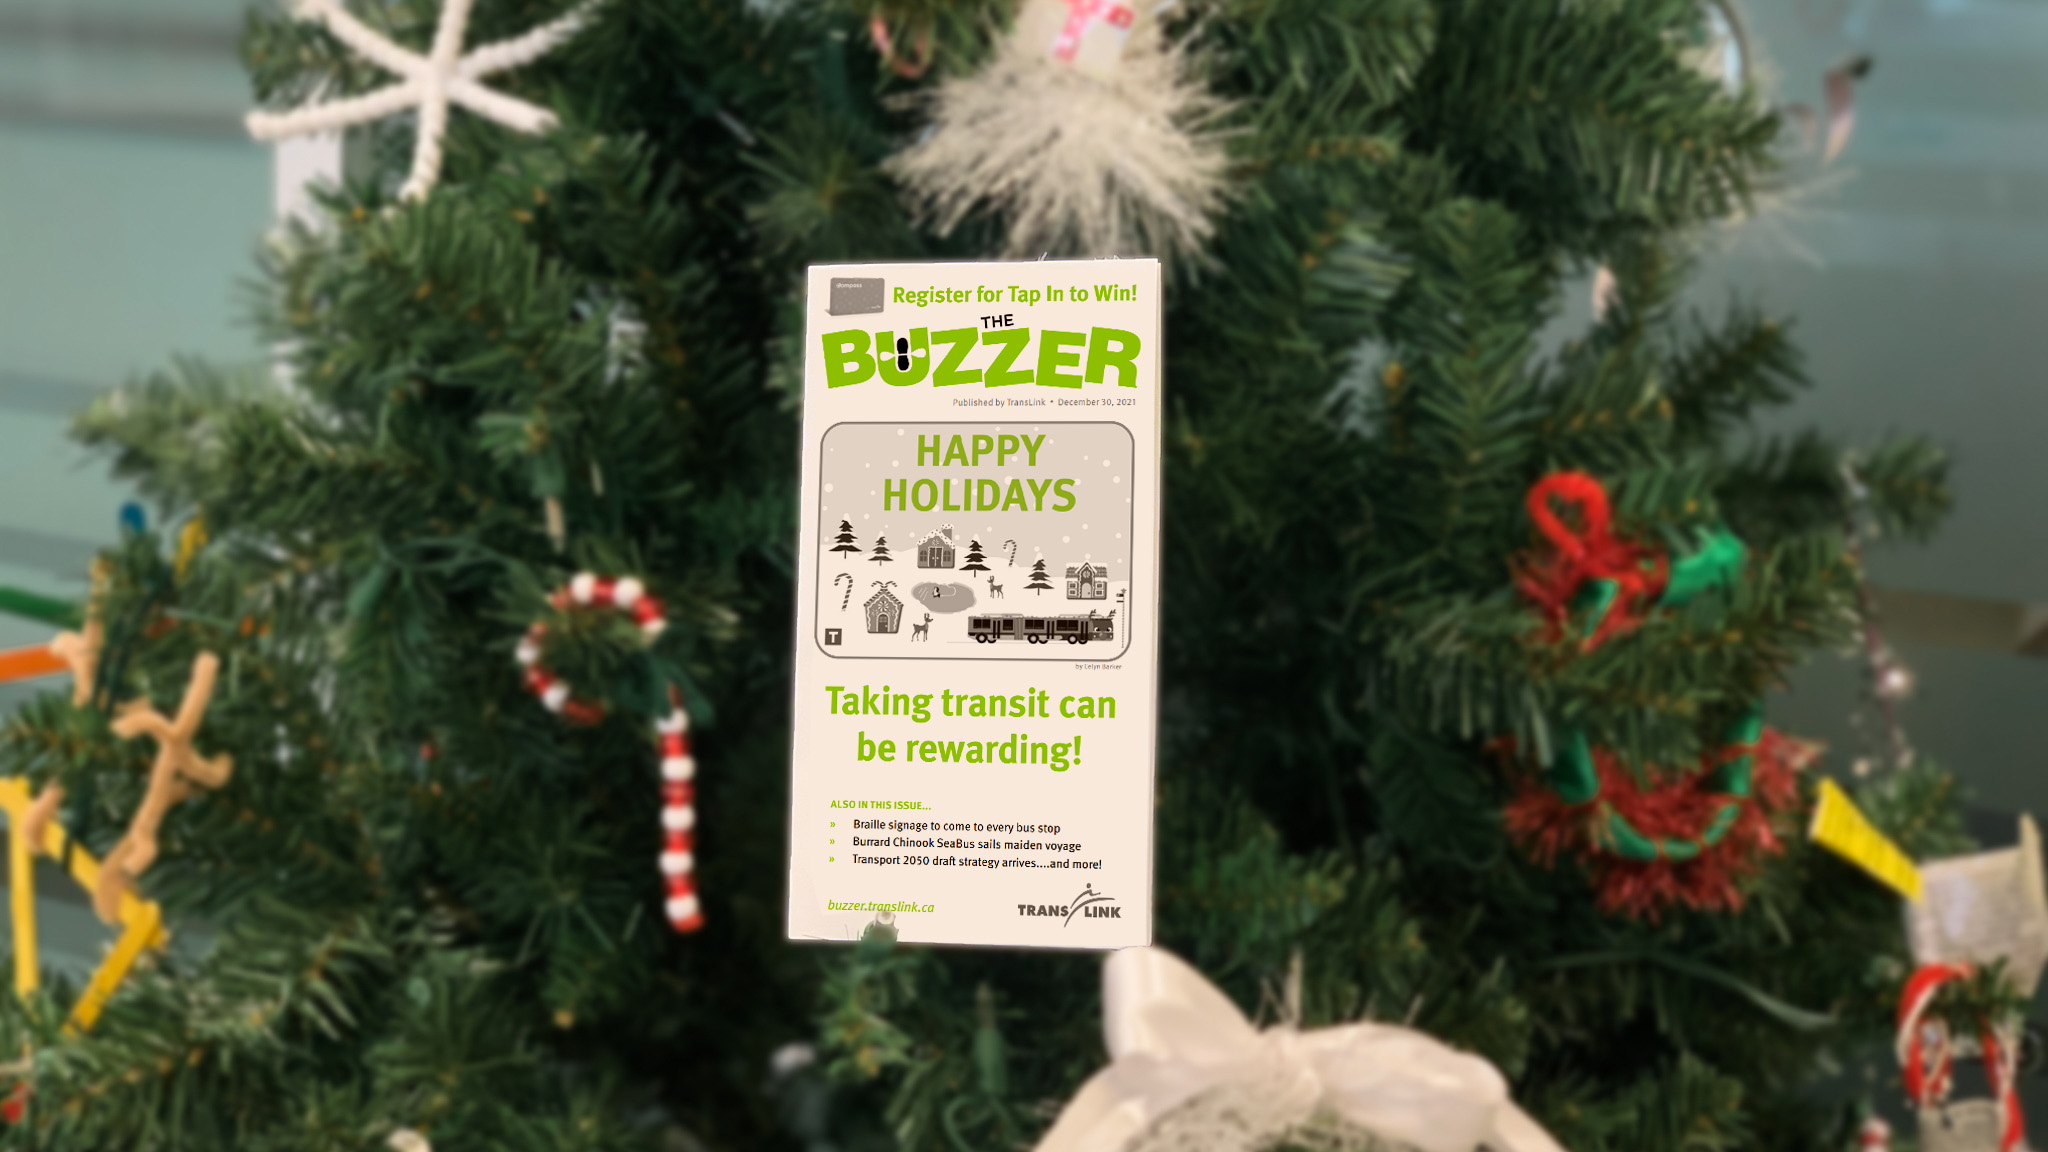 The December 2021 issue of The Buzzer resting on a Christmas tree